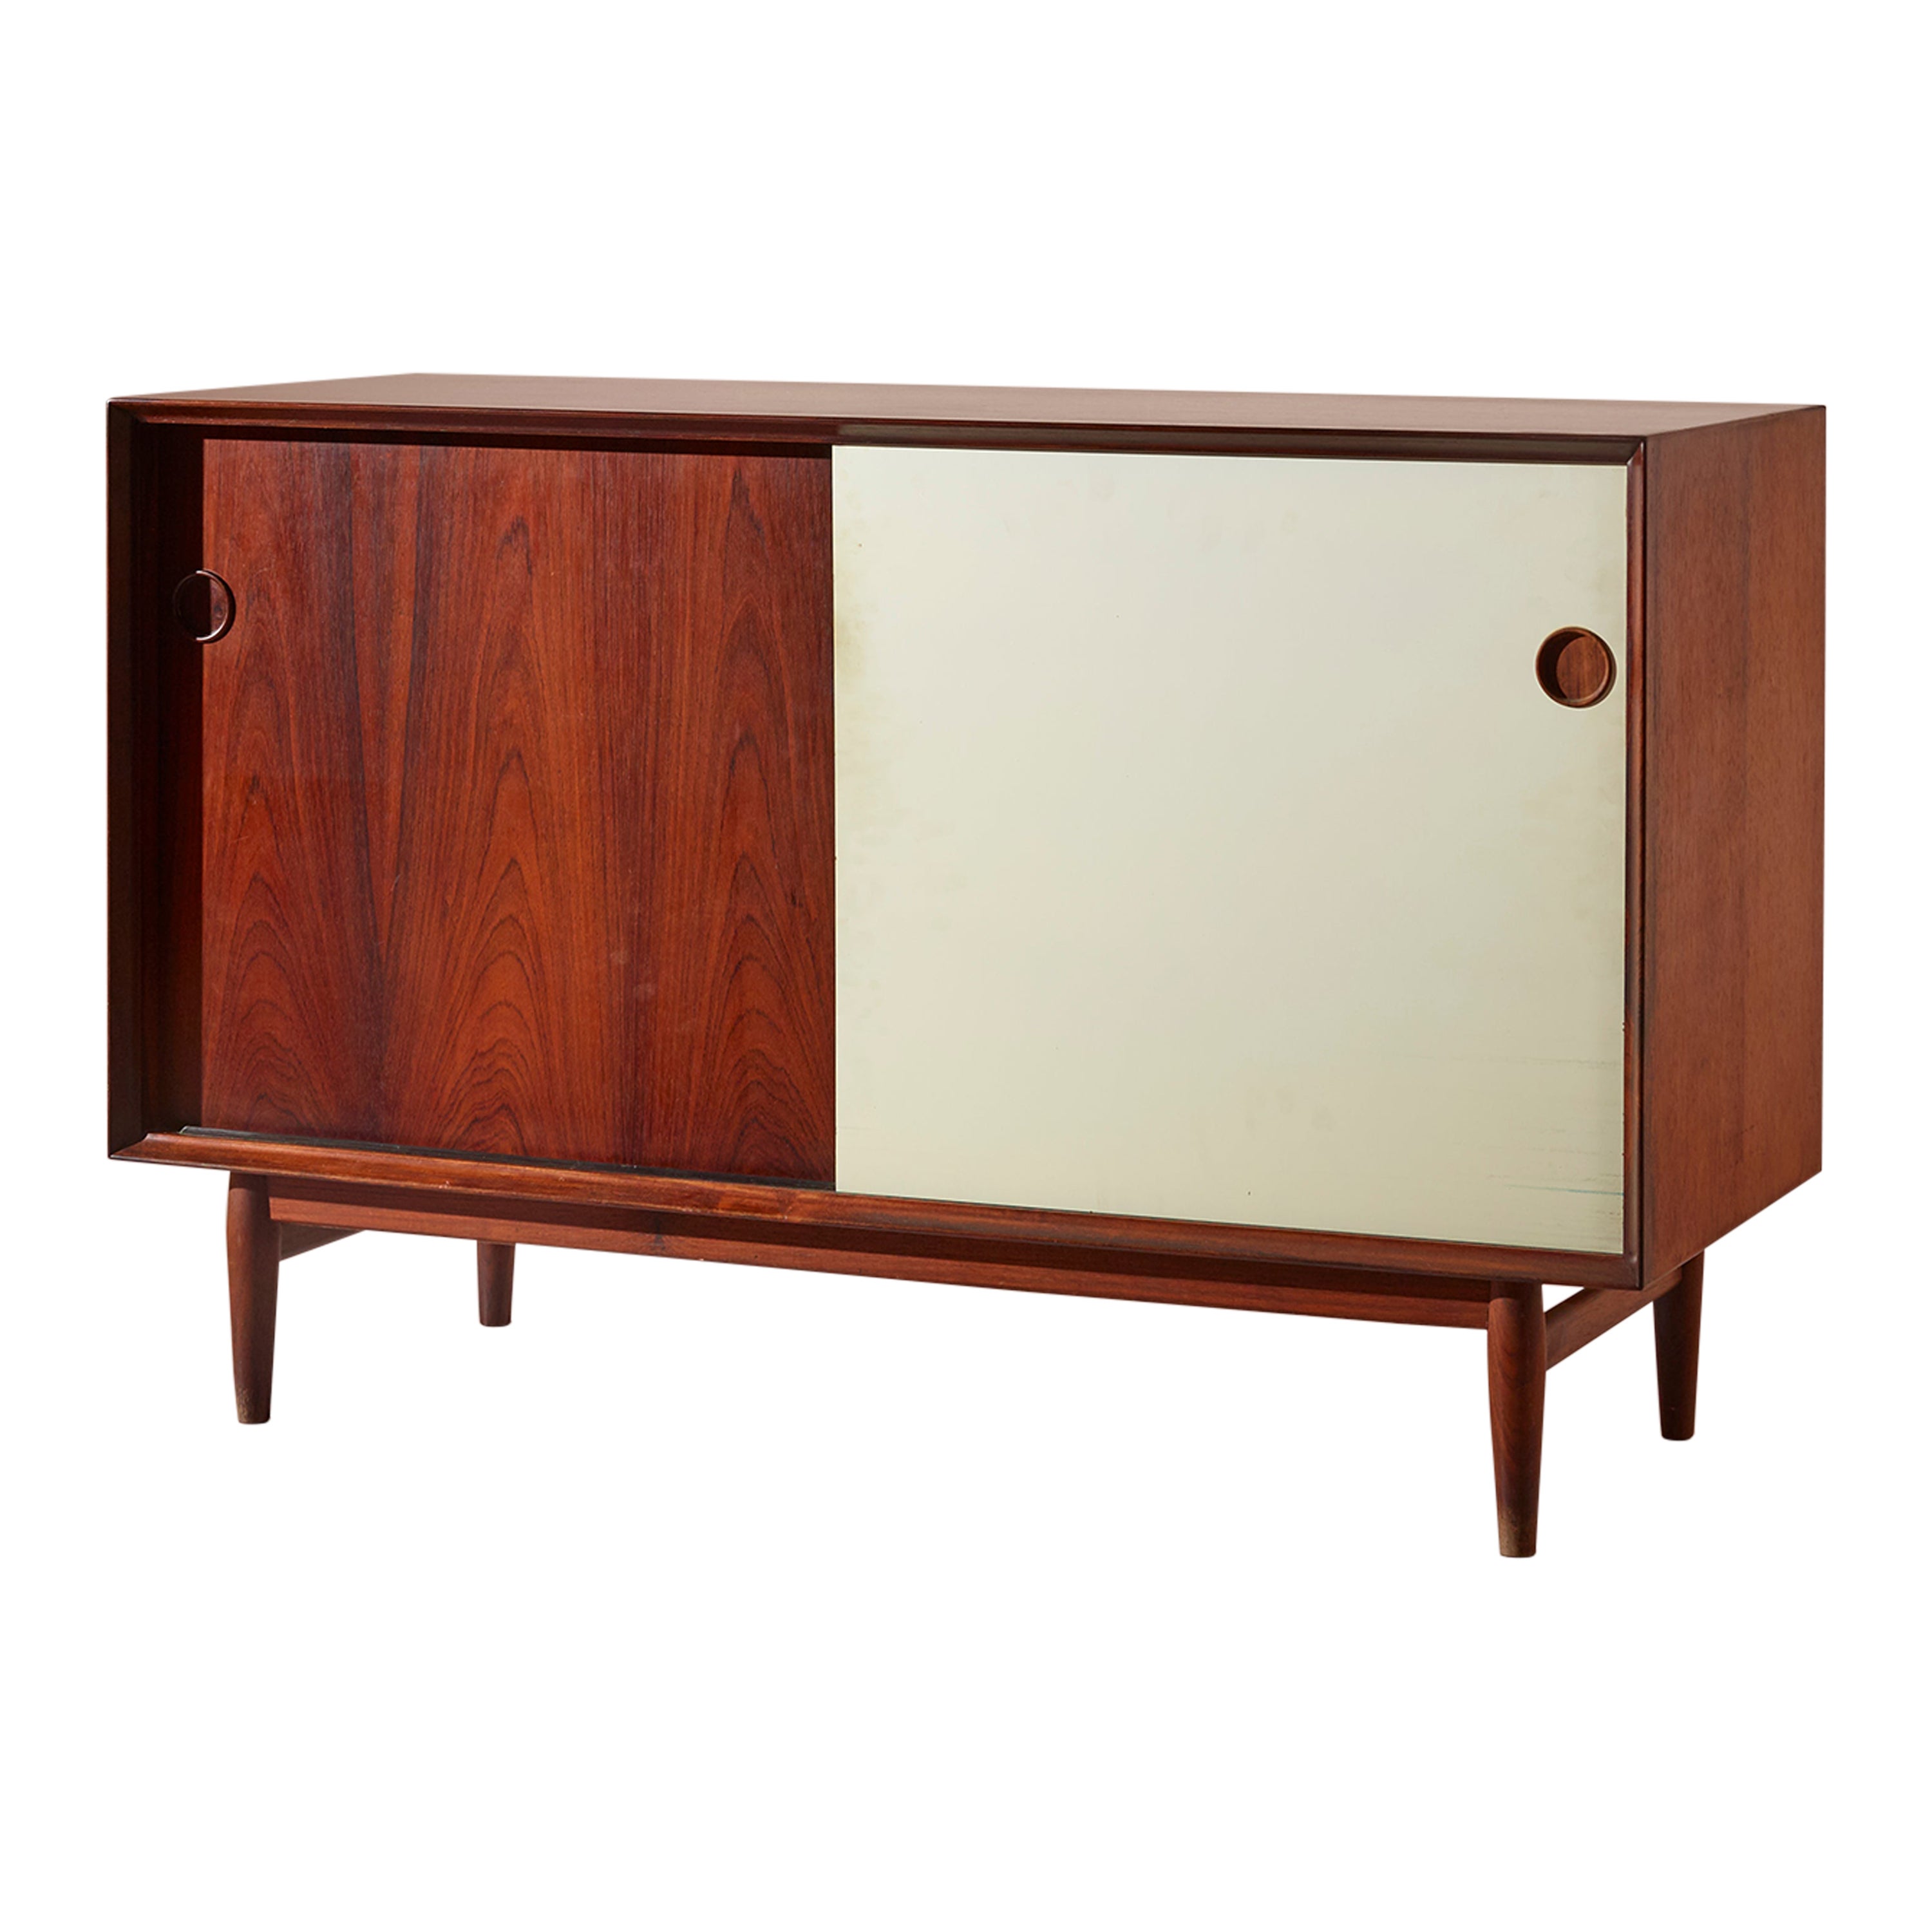 Arne Vodder Model OS11 Sideboard by Sibast with Coloured and Reversible Doors For Sale